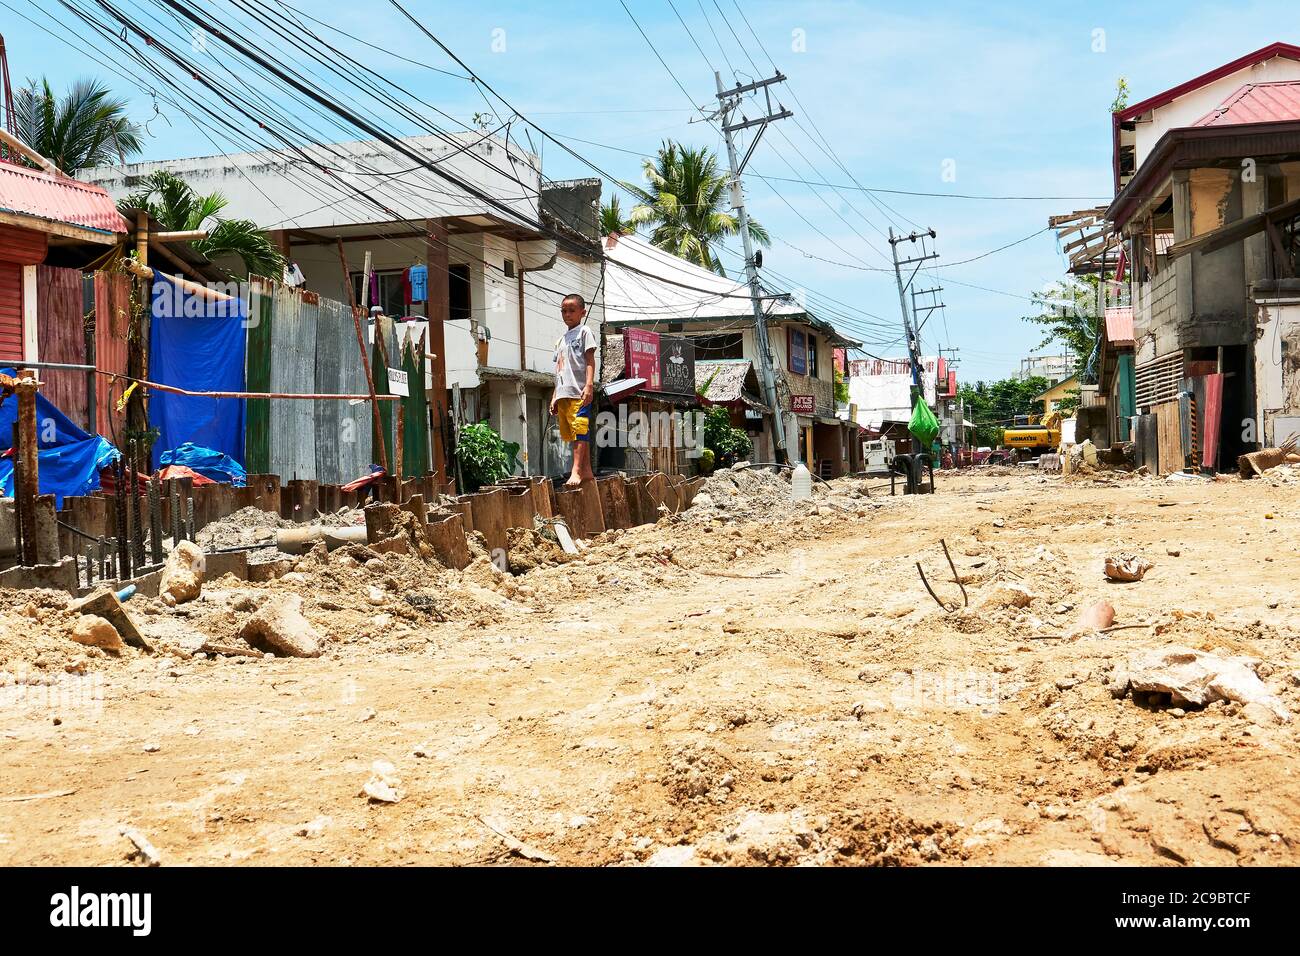 Boracay Island, Aklan, Philippines: Rehabilitation efforts of the Philippine government with road widening and new sewage system Stock Photo